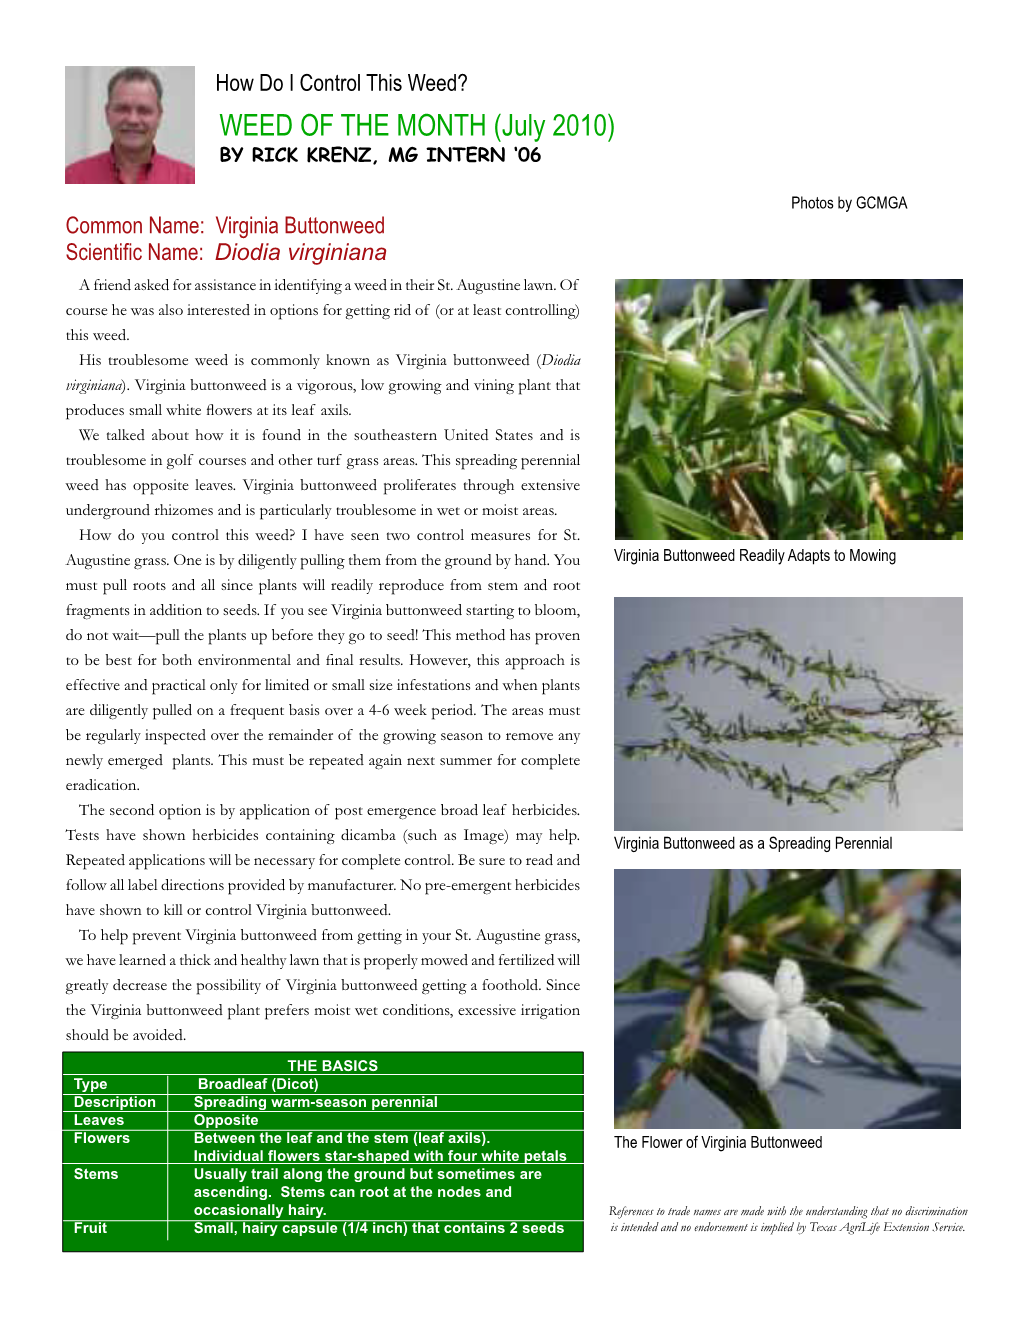 WEED of the MONTH (July 2010) by Rick Krenz, MG Intern ‘06